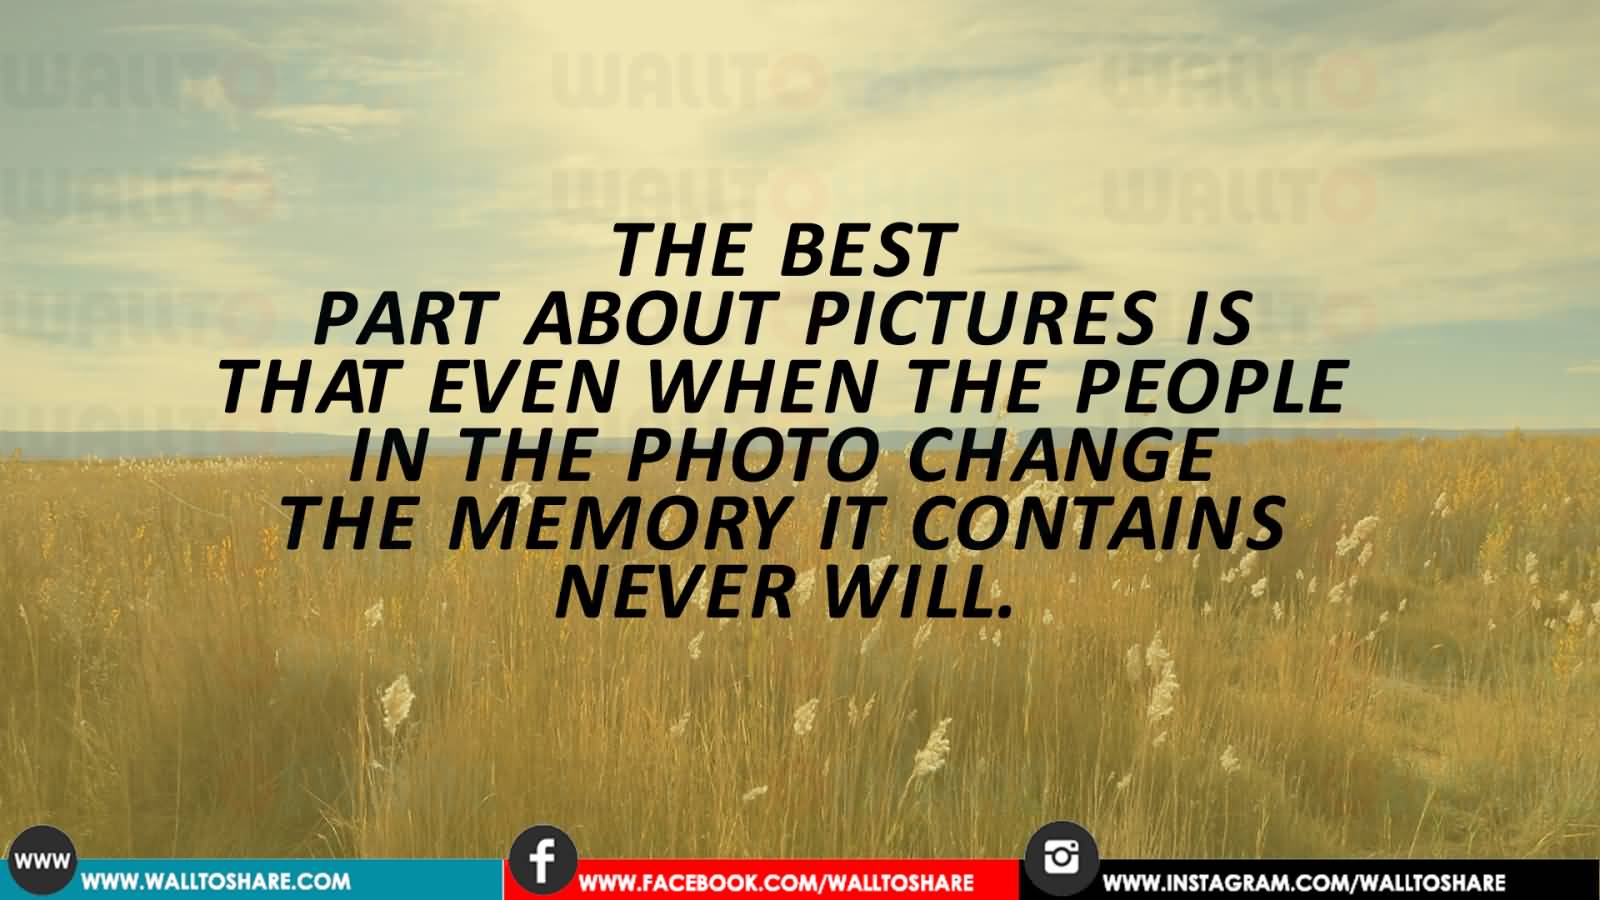 The best thing about a picture is that it never changes, even when the people in it do